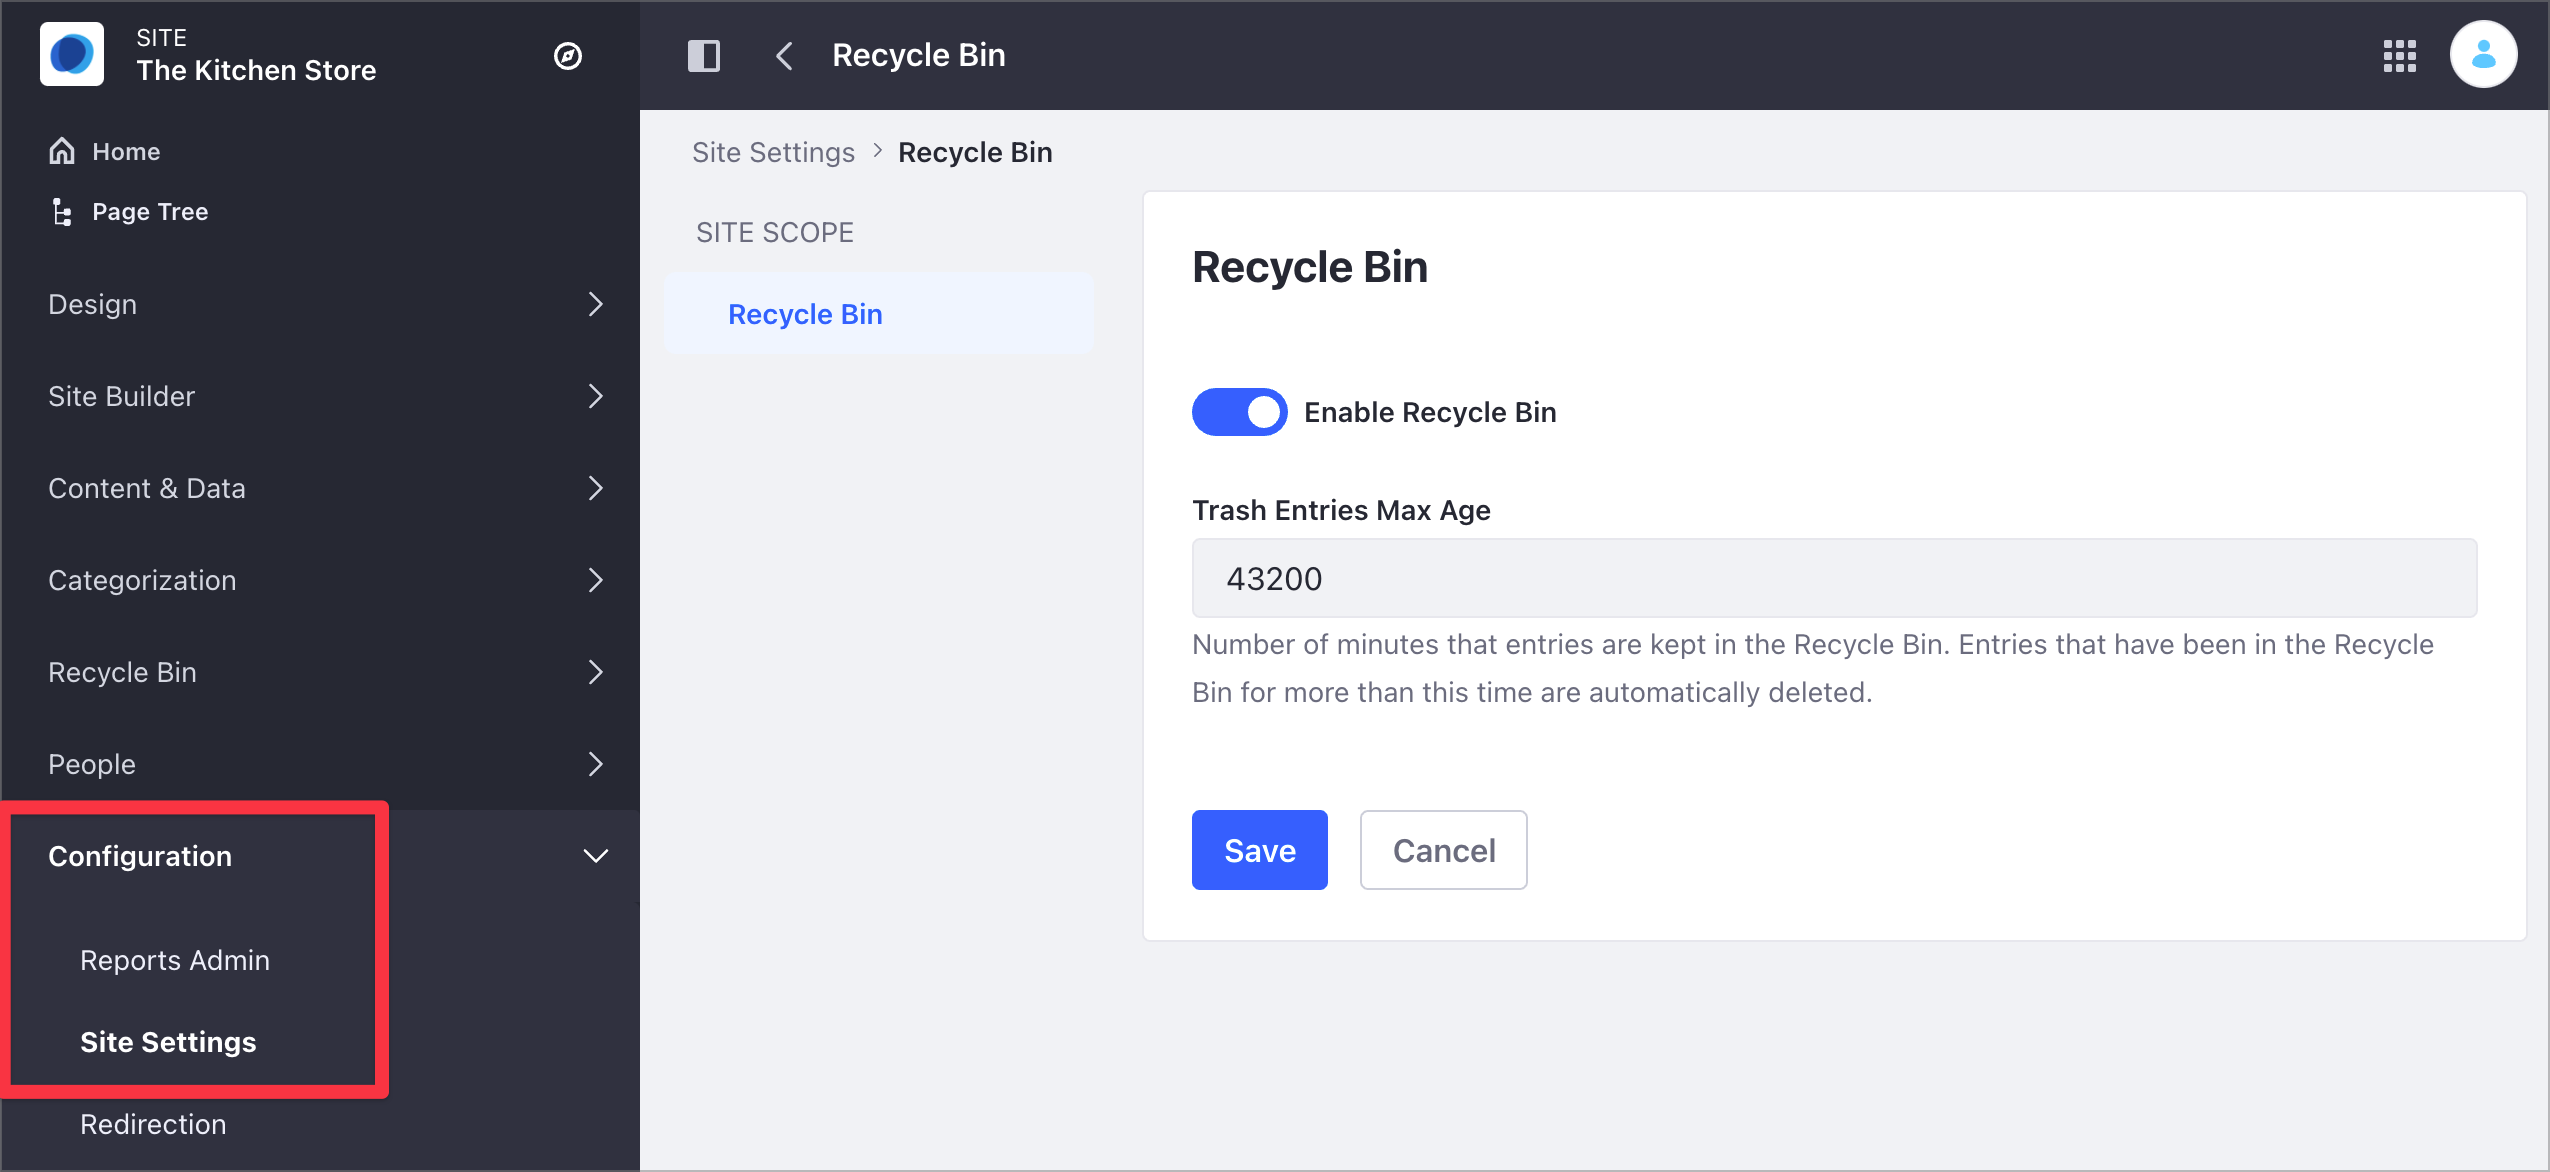 In Liferay DXP 7.4+, change the Recycle Bin options from the Site Settings section.